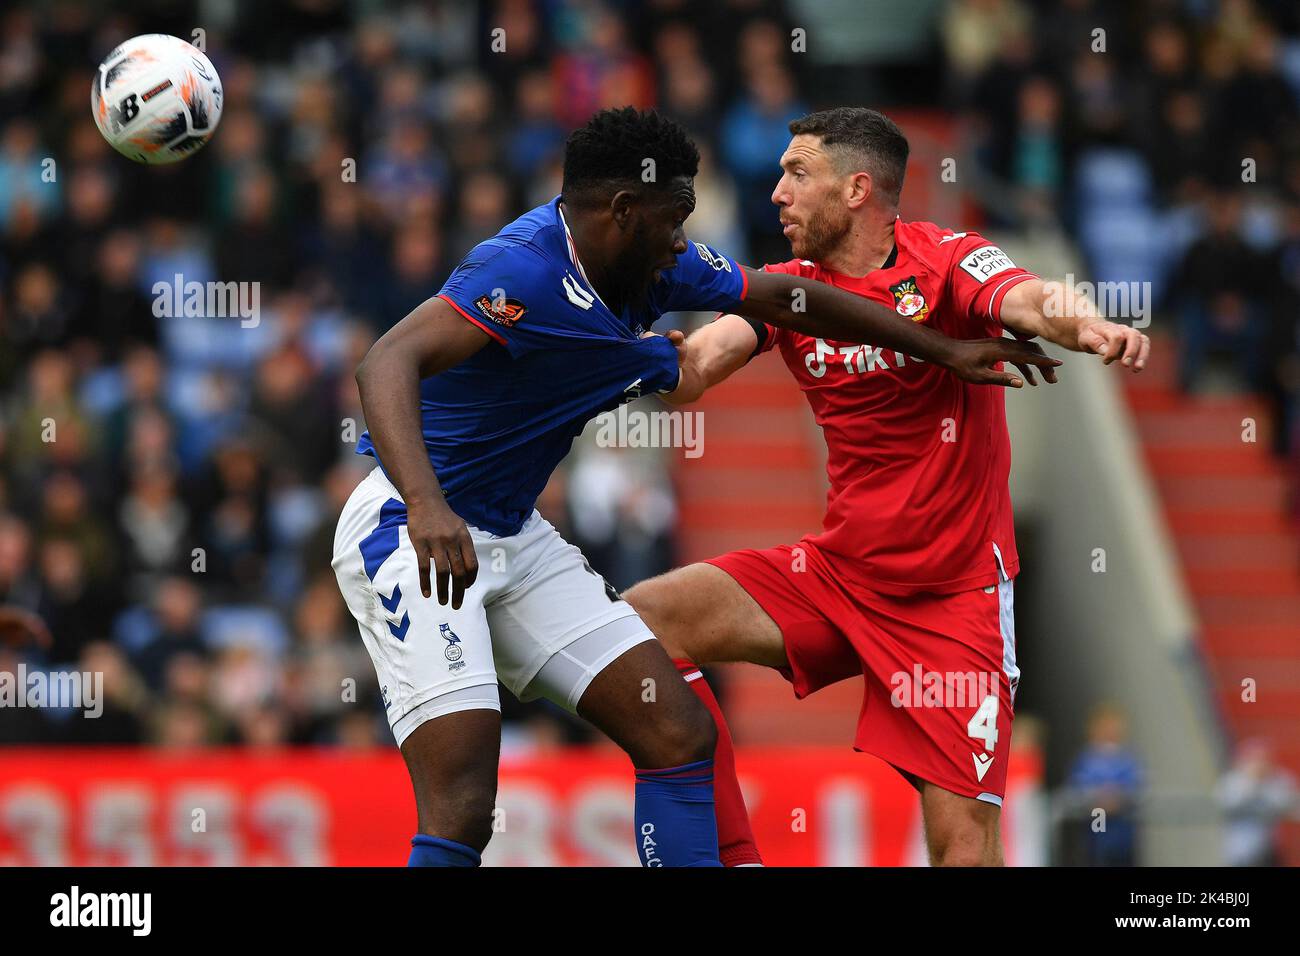 Oldham, UK. 1st October 2022during the Vanarama National League match between Oldham Athletic and Wrexham at Boundary Park, Oldham on Saturday 1st October 2022Mike Fondop-Talom of Oldham Athletic tussles with Ben Tozer of Wrexham Football Club during the Vanarama National League match between Oldham Athletic and Wrexham at Boundary Park, Oldham on Saturday 1st October 2022 during the Vanarama National League match between Oldham Athletic and Wrexham at Boundary Park, Oldham on Saturday 1st October 2022. Credit: MI News & Sport /Alamy Live News Stock Photo